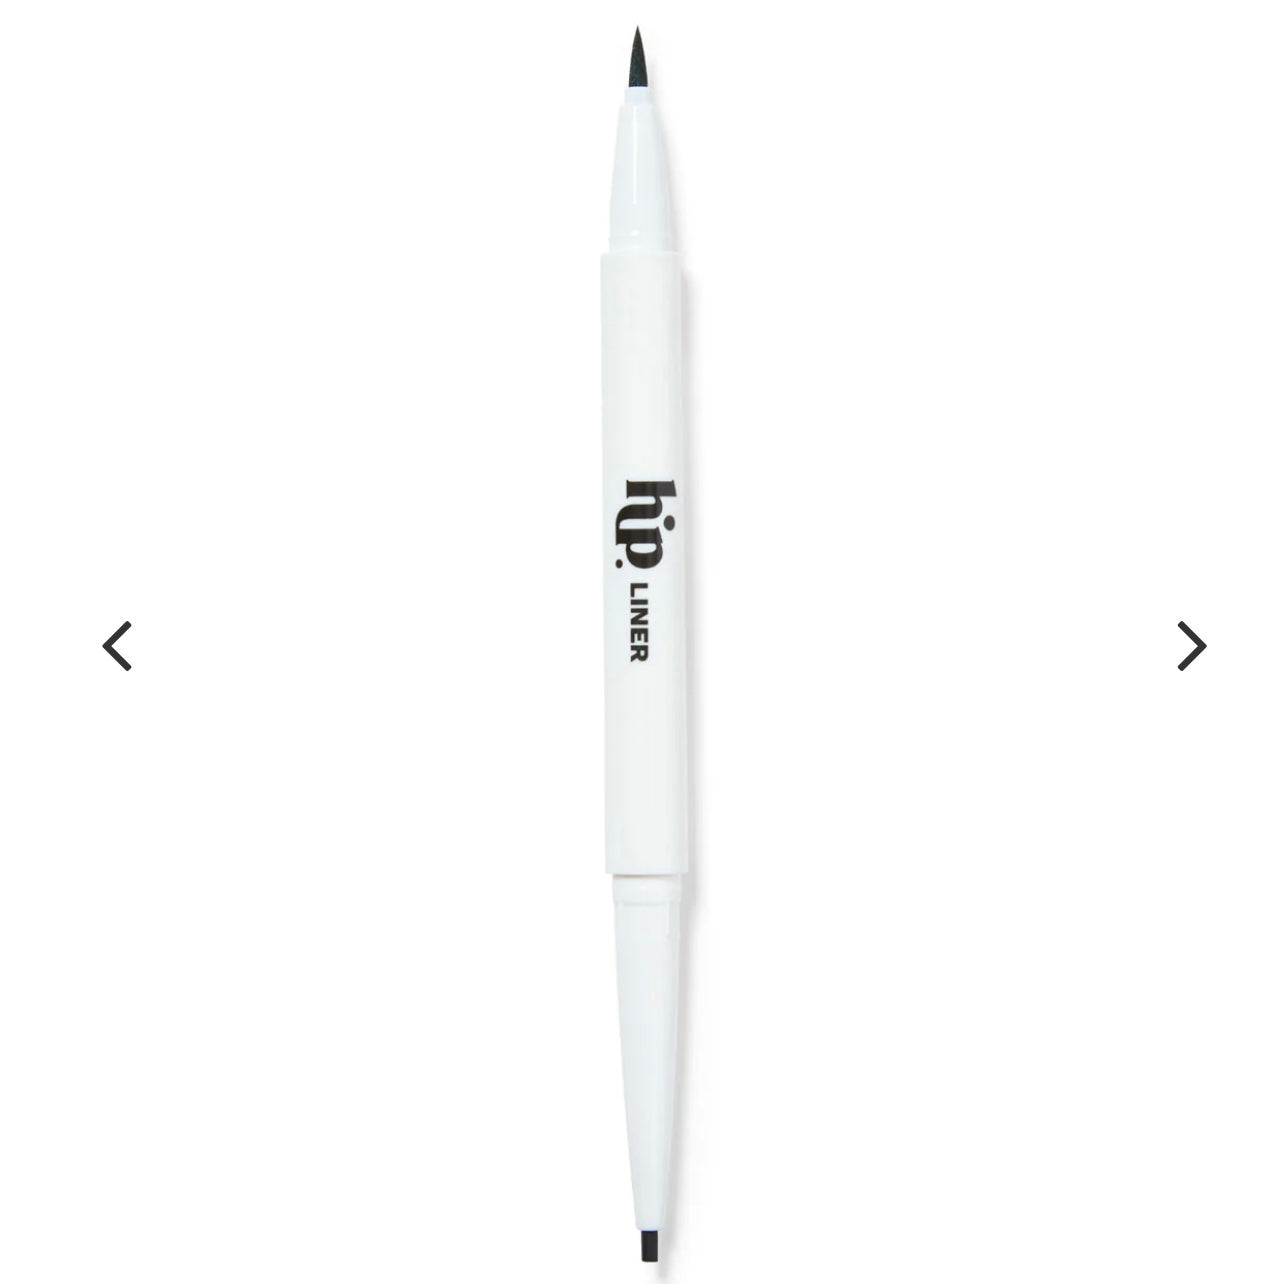 Hipdot double ended liquid eyeliner in the color muddy brown